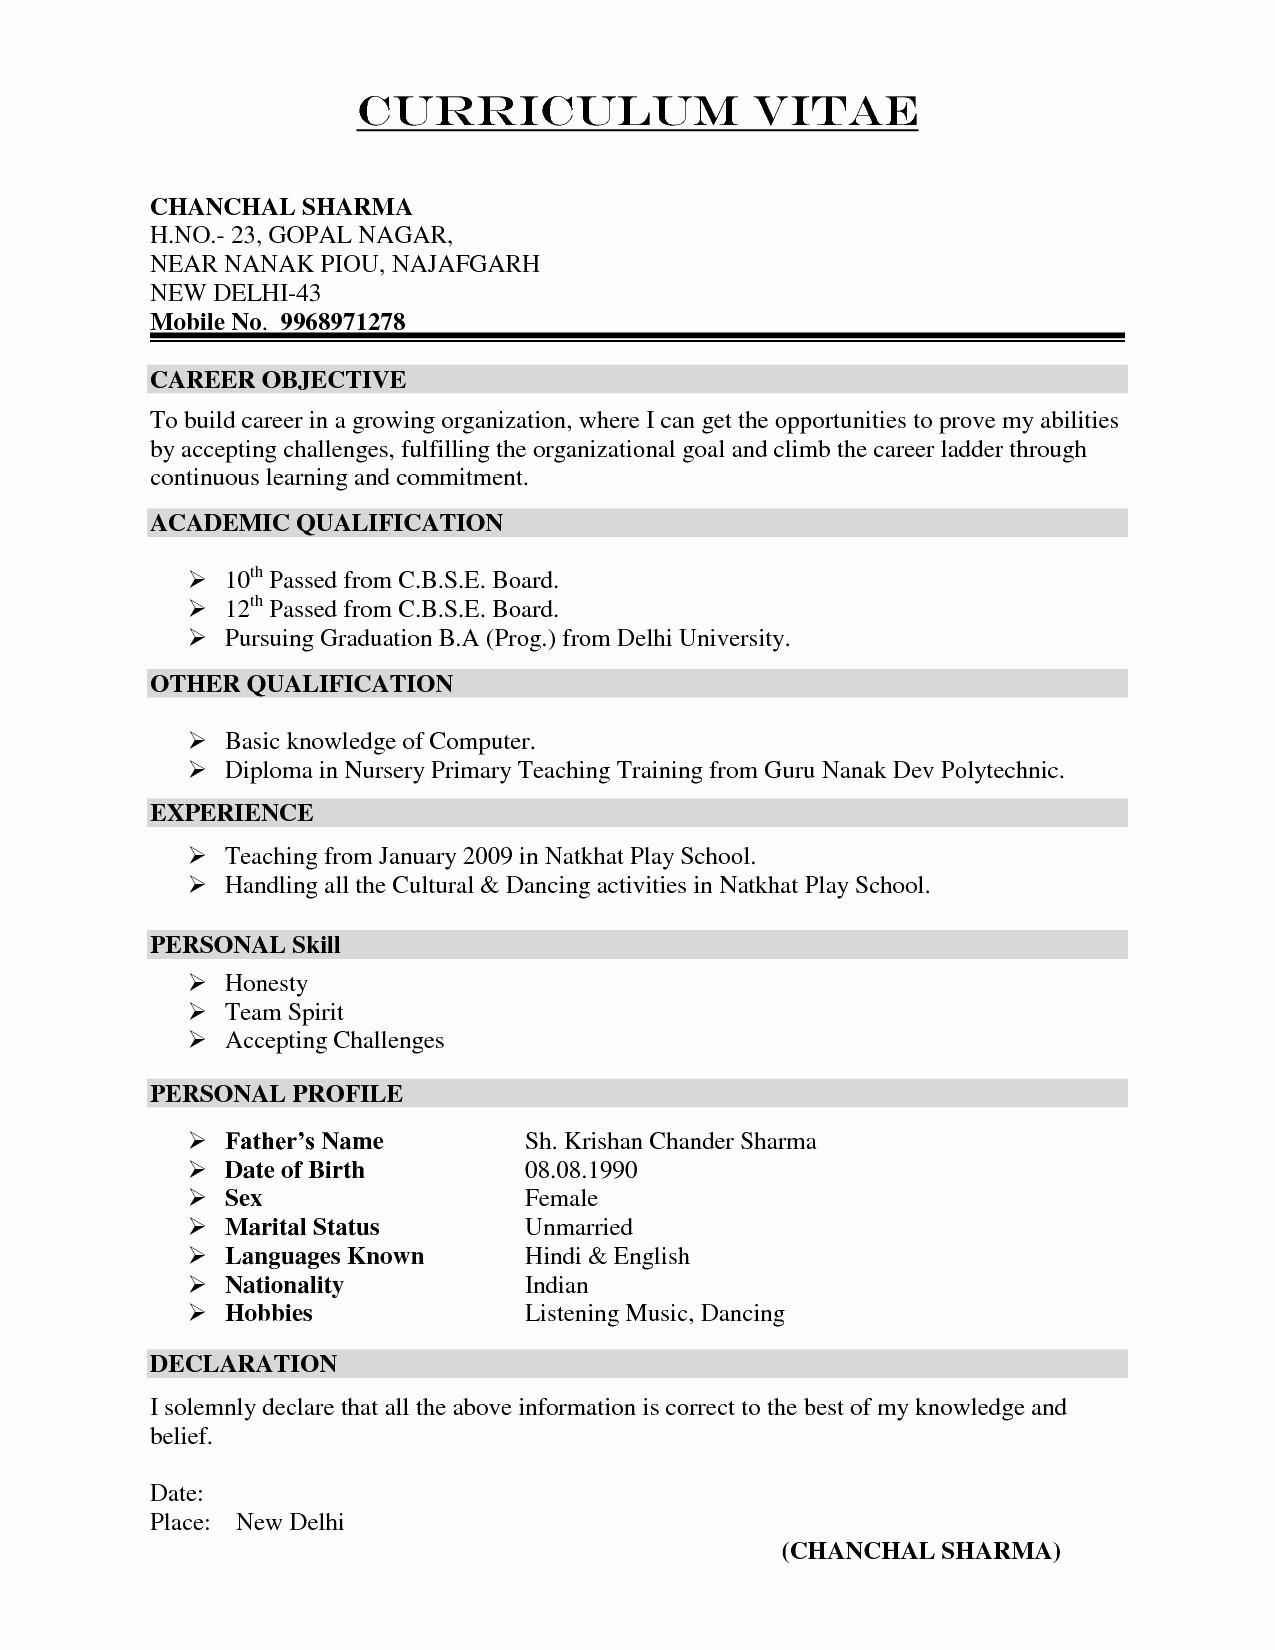 Simple Resume Cover Letter Template - Resumes and Cover Letters Elegant New Resume Cover Letter formatted